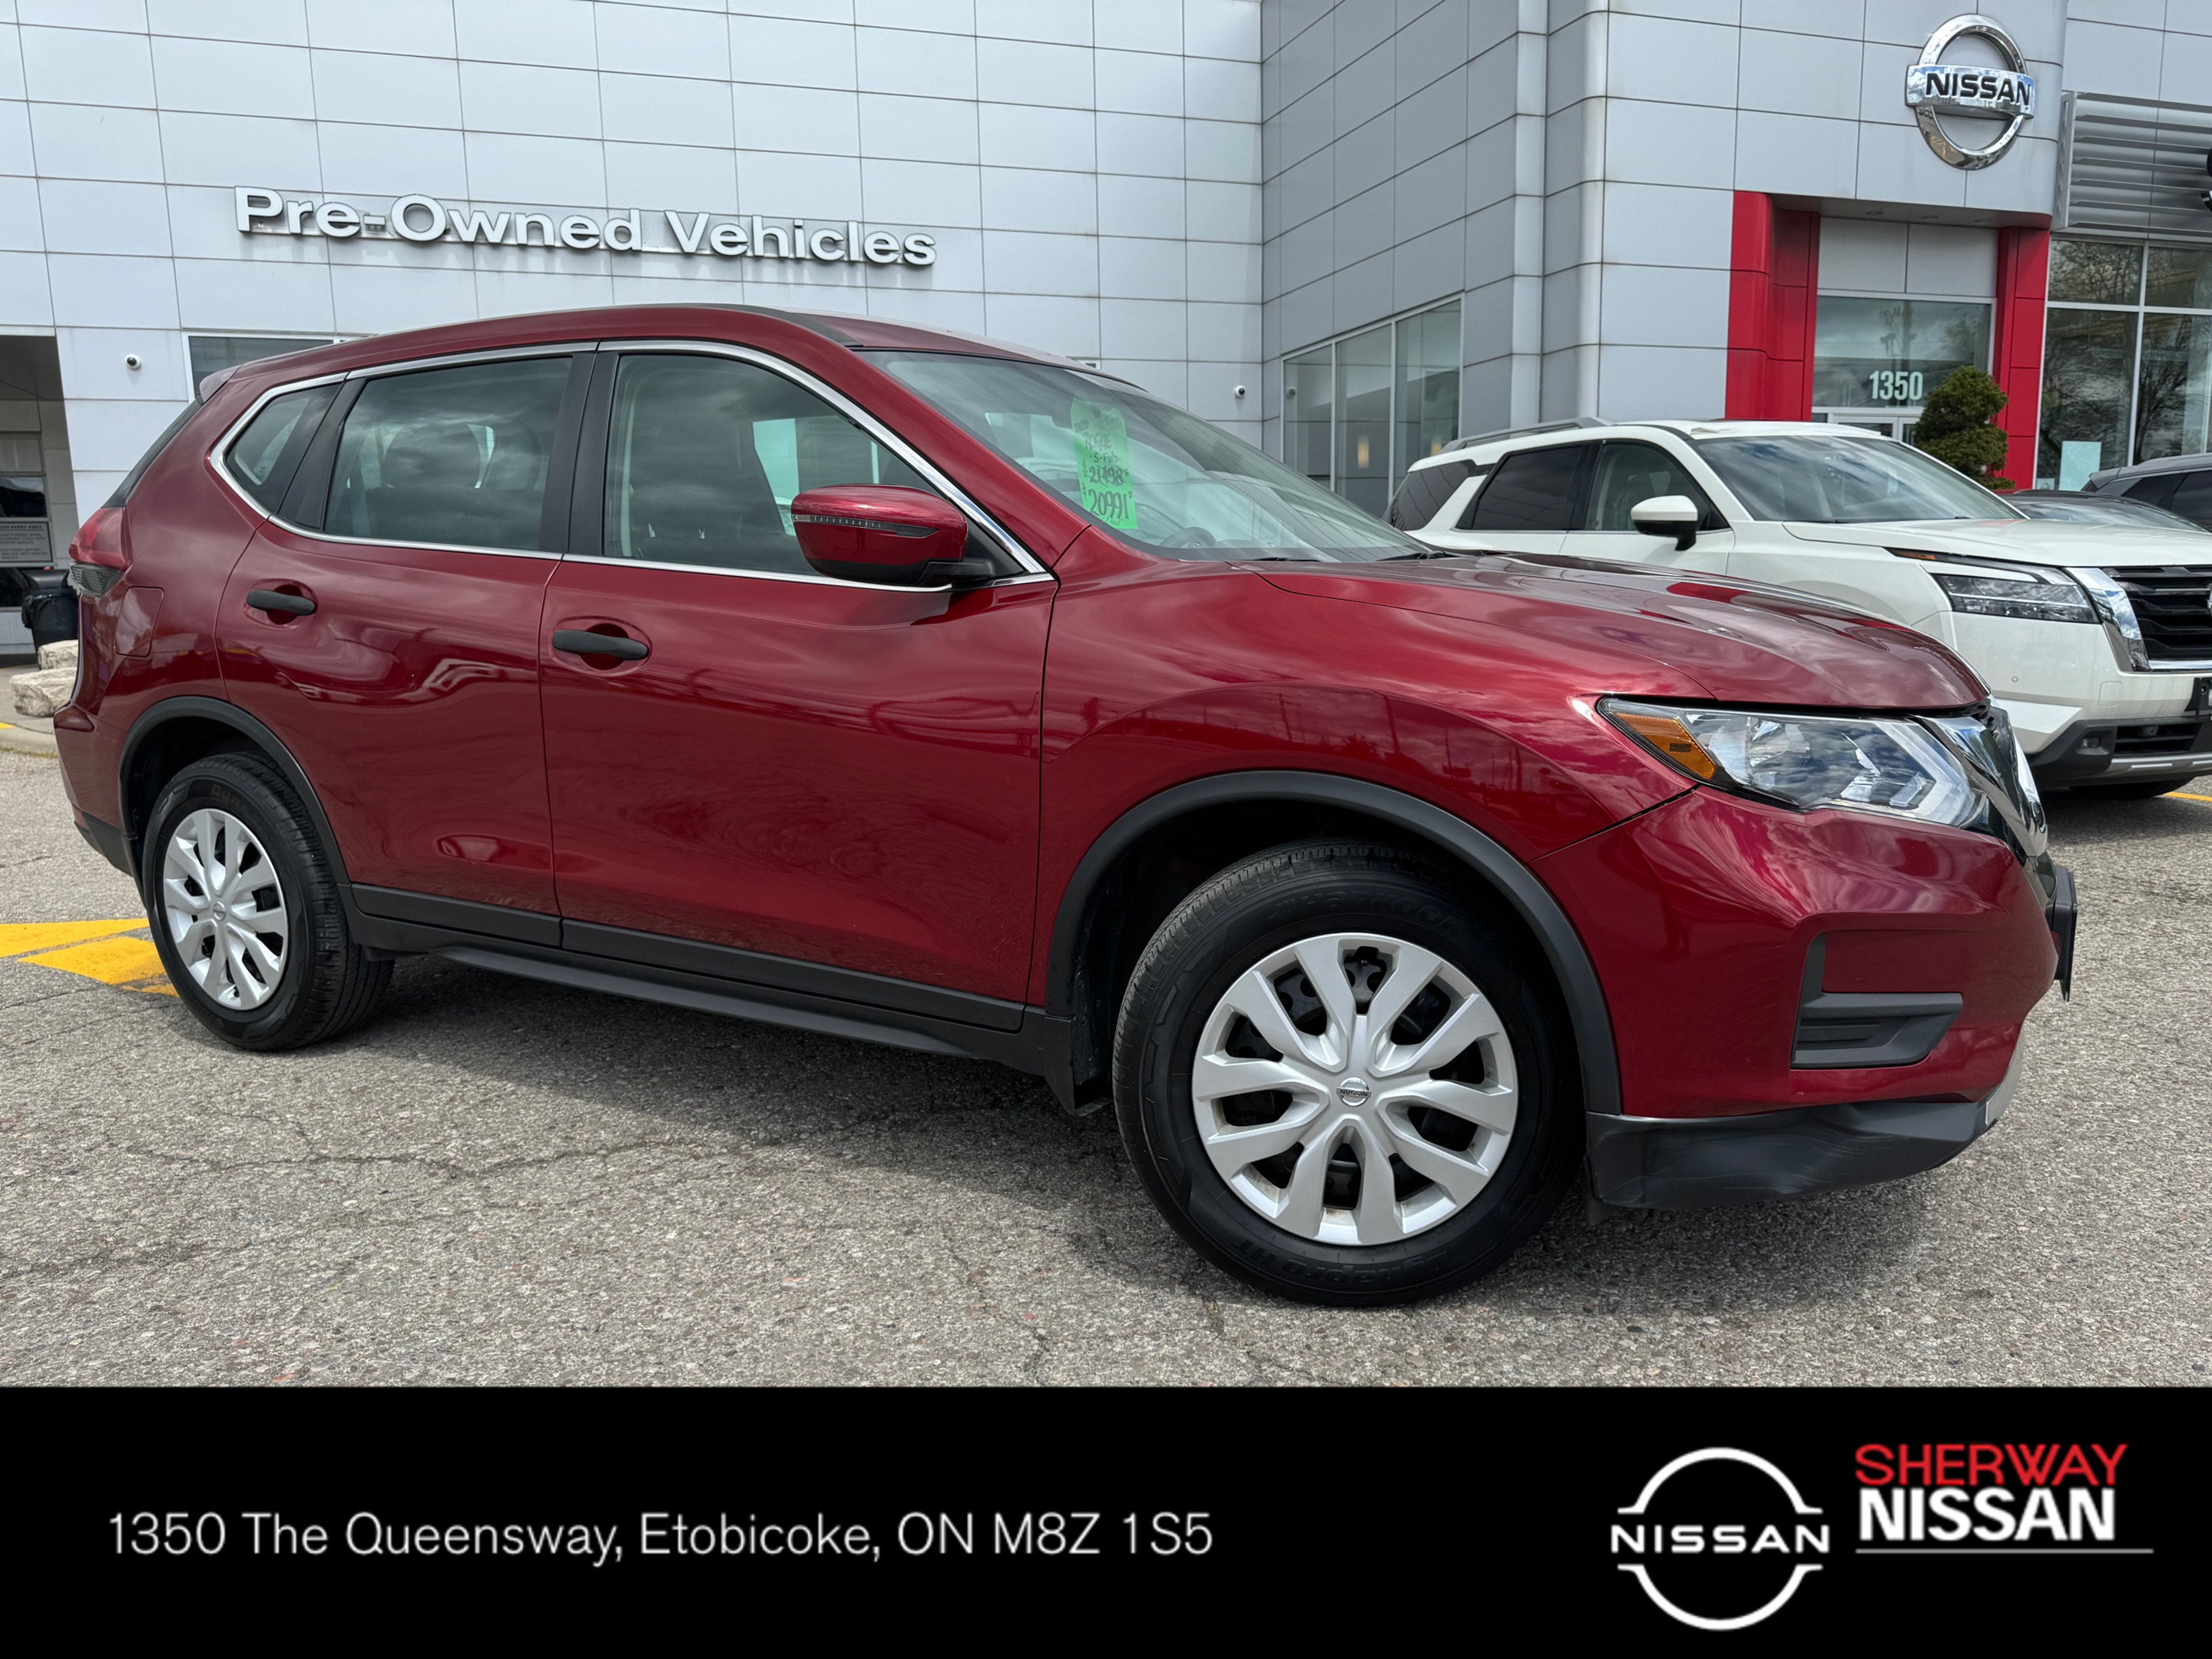 2020 Nissan Rogue LOW KM 1 0WNER TRADE WITH 57103 KMS. CLEAN CARFAX.